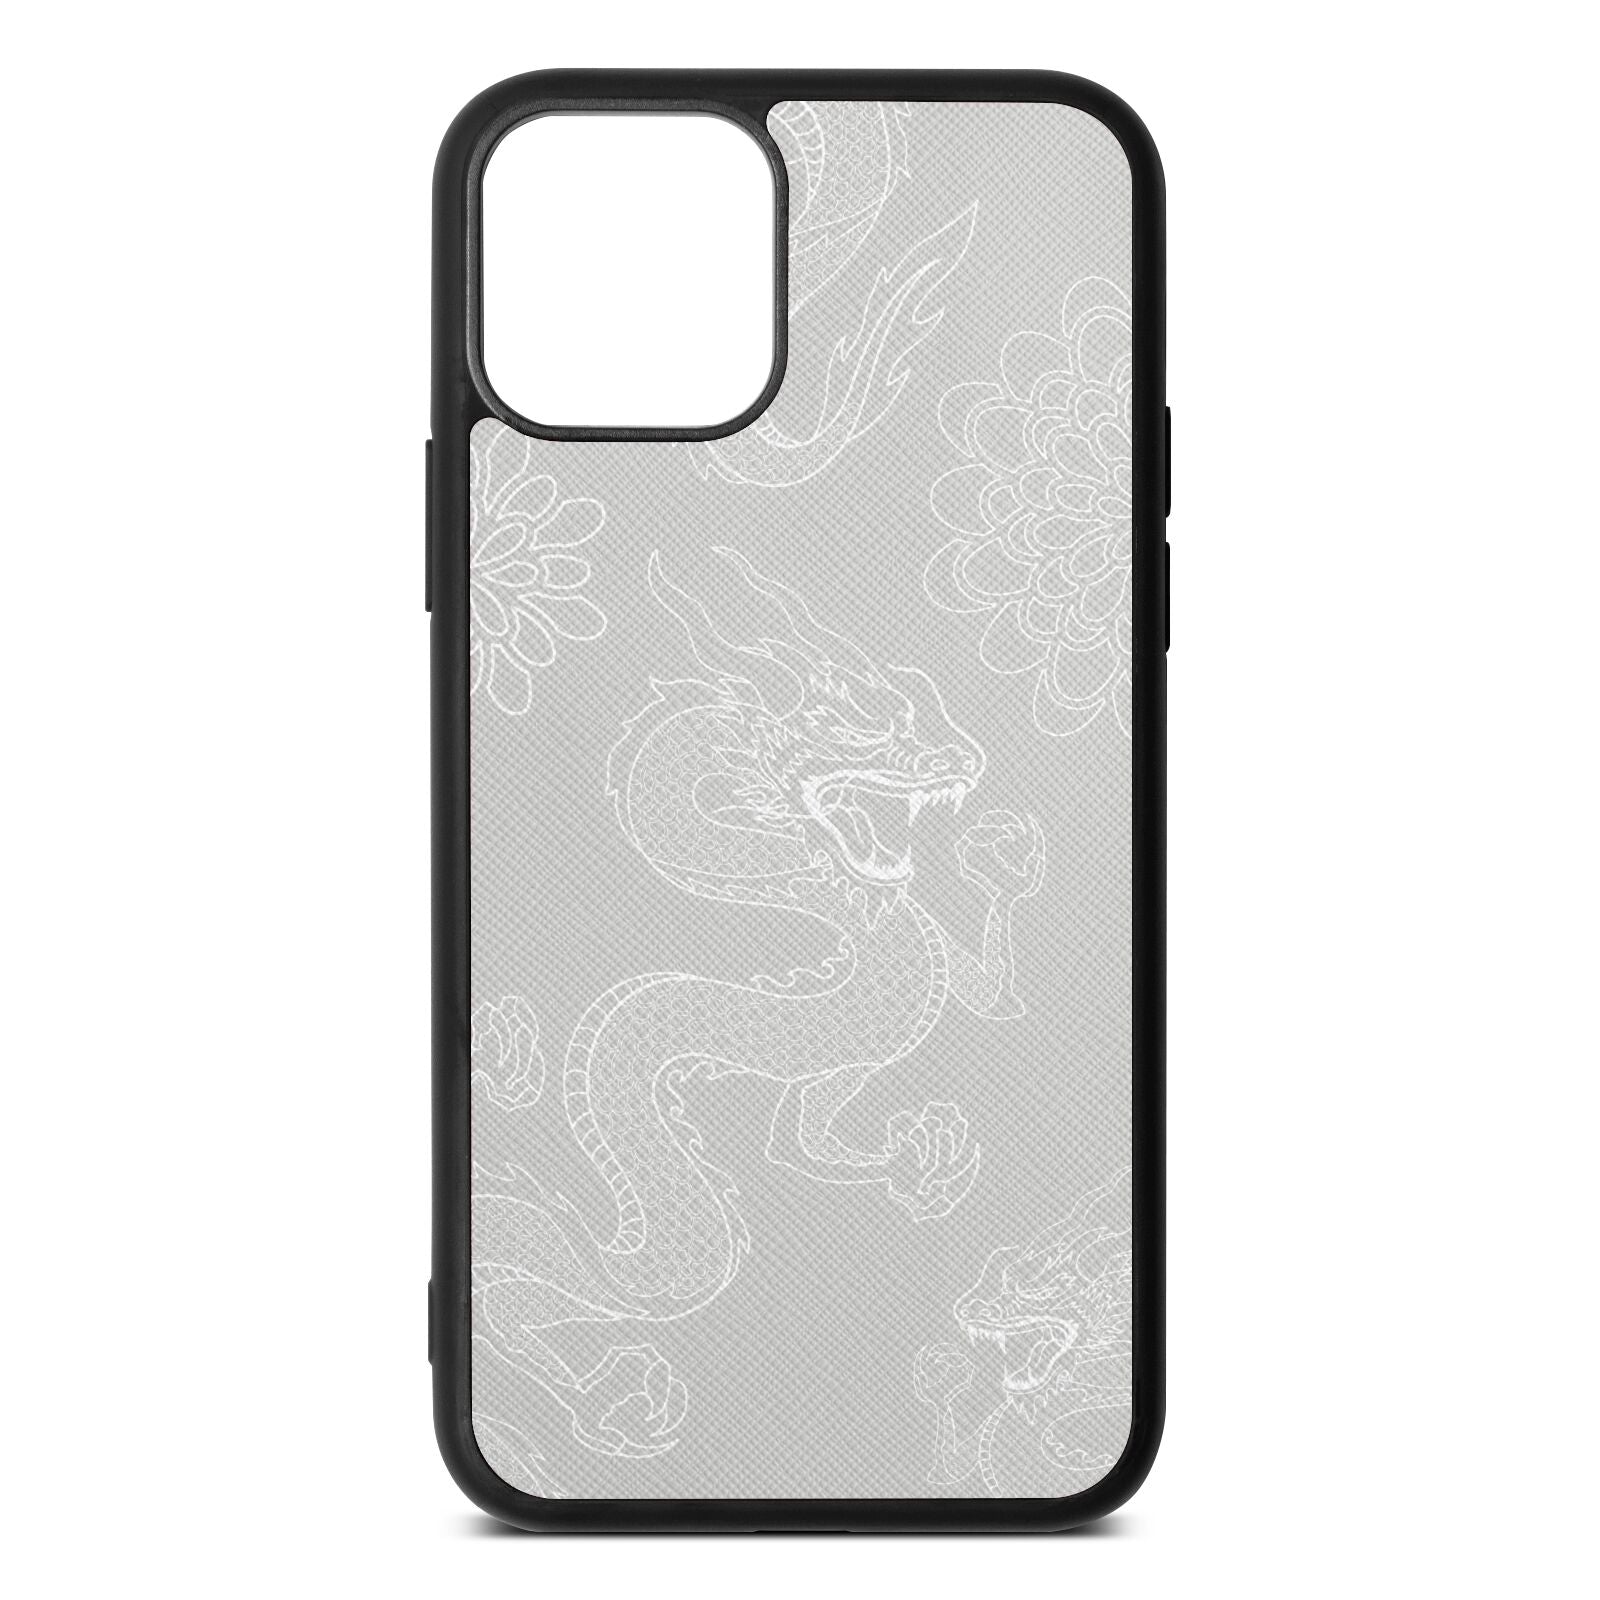 Dragons Silver Saffiano Leather iPhone 11 Pro Case